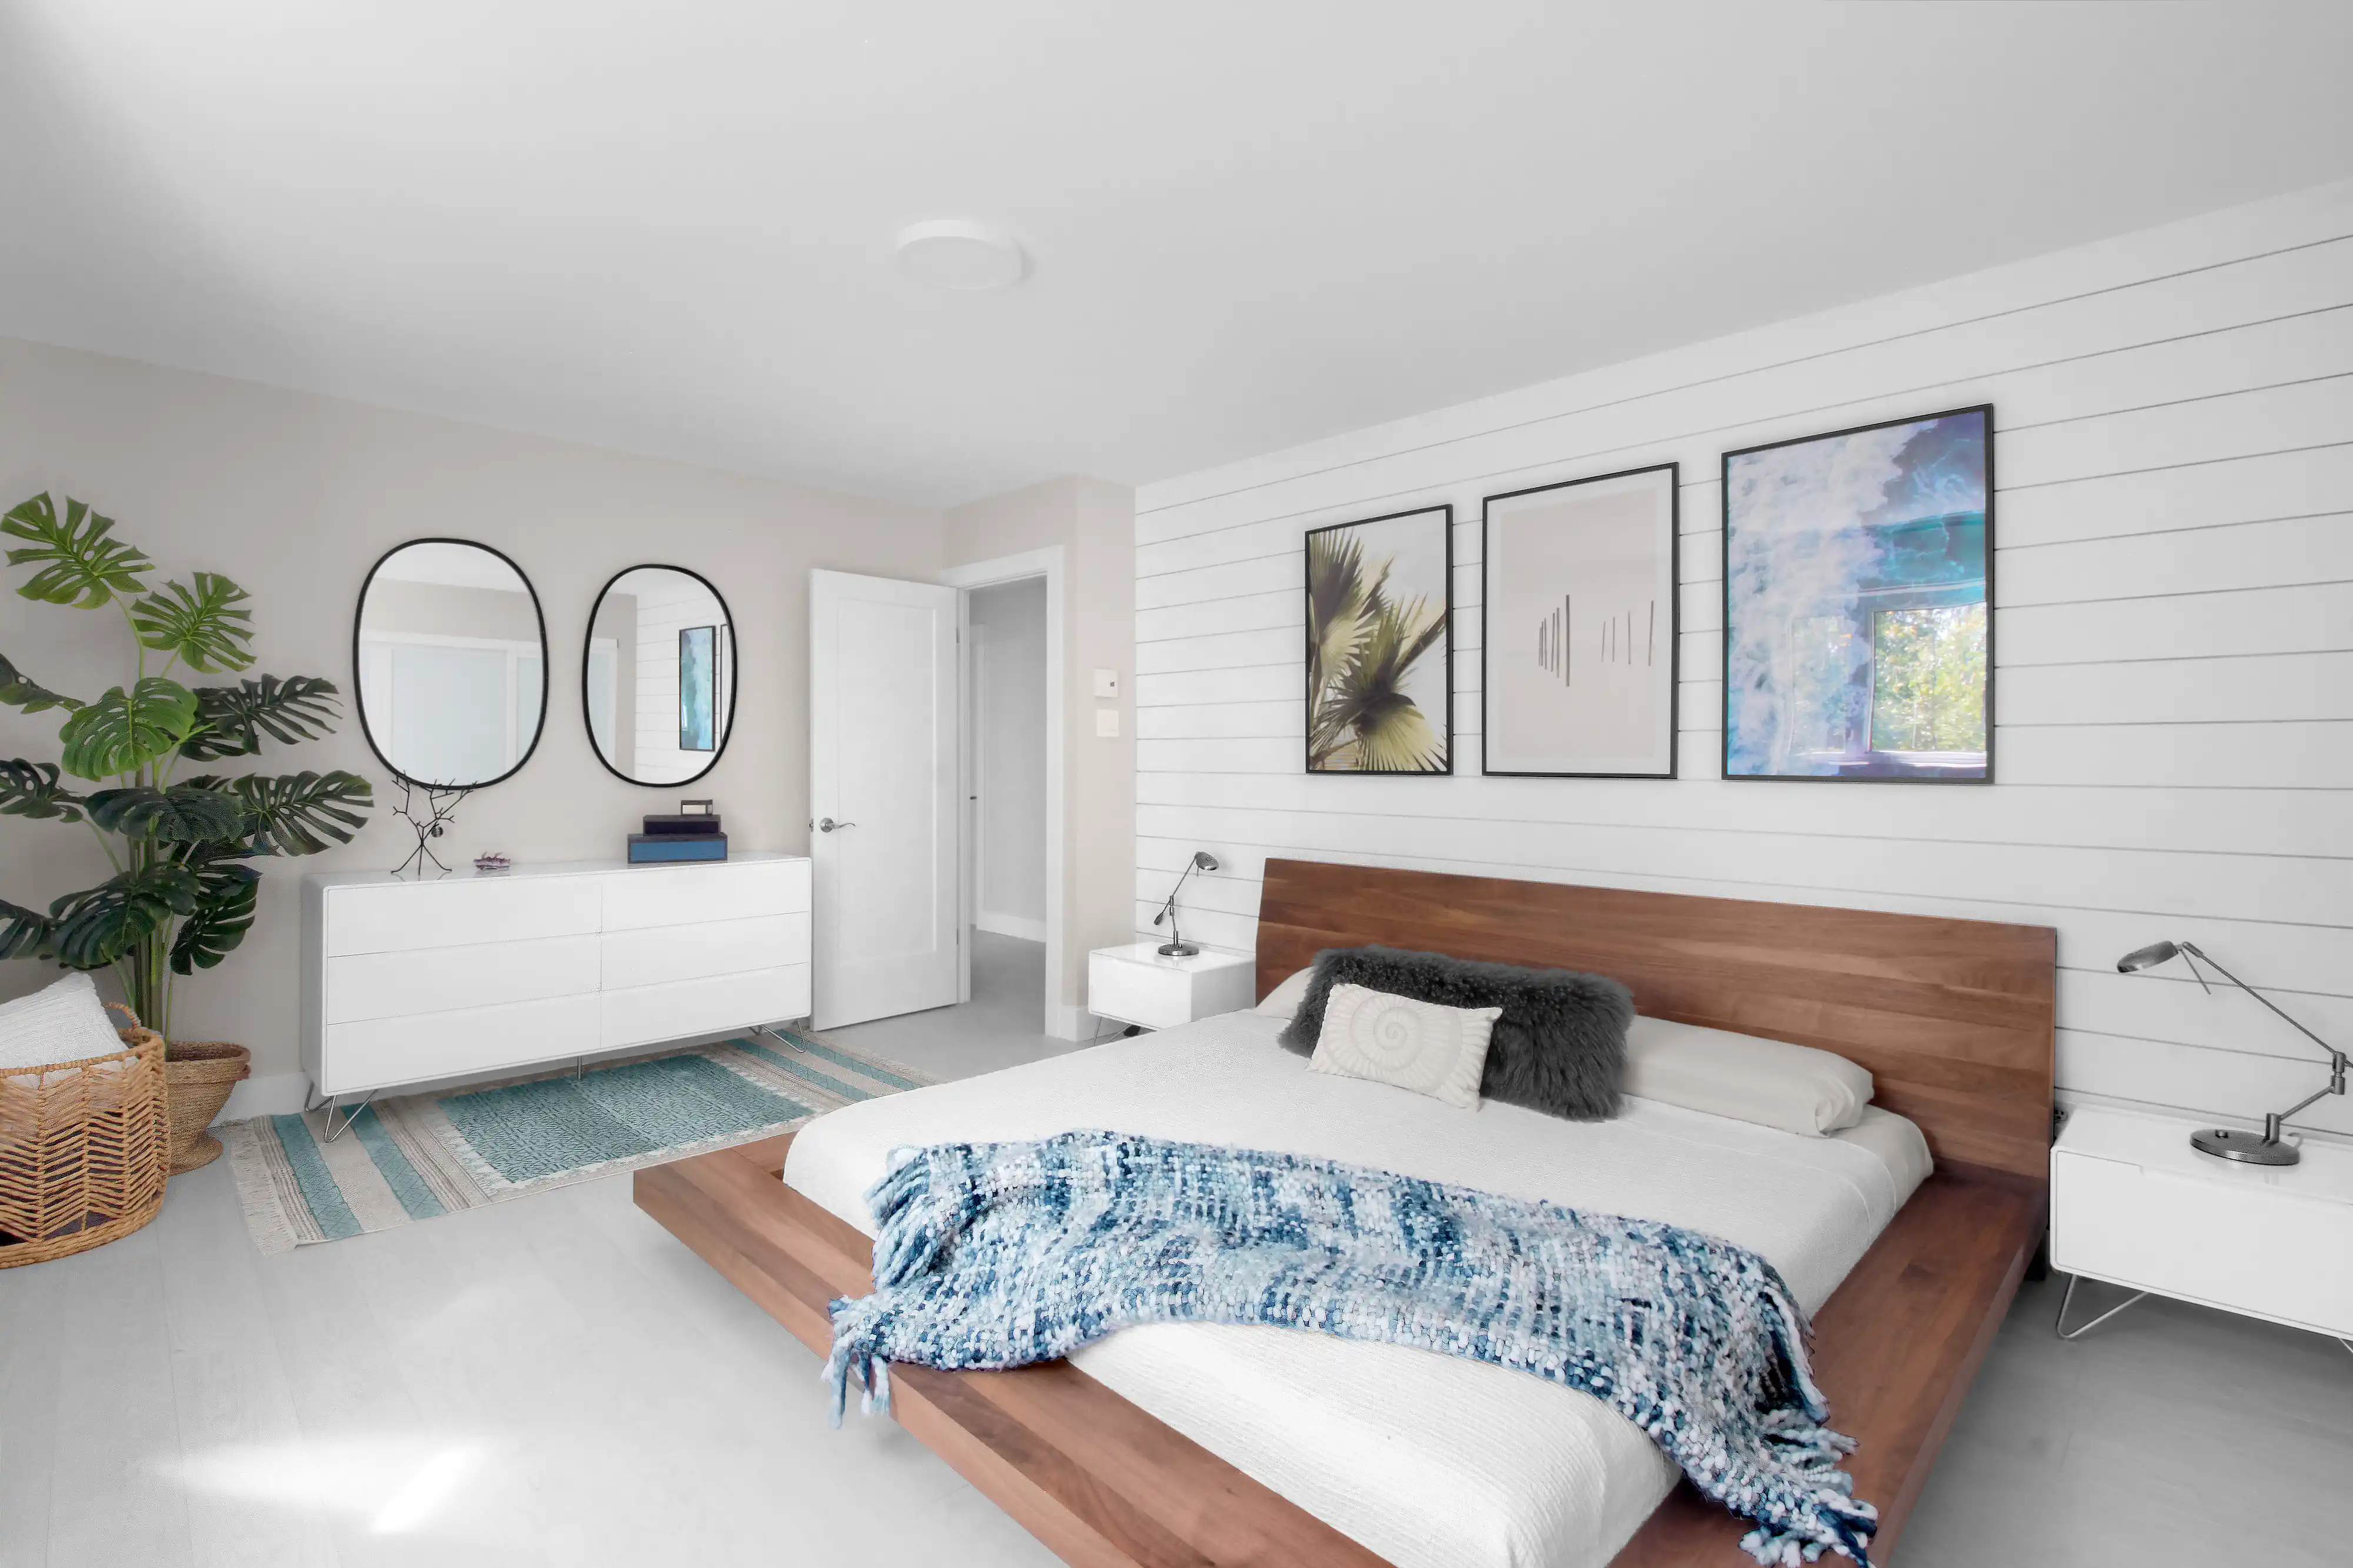 Modern bedroom with a white and wood theme, featuring a wooden platform bed, blue throw blanket, white nightstands, and framed art pieces, interior by Sarah Brown Design